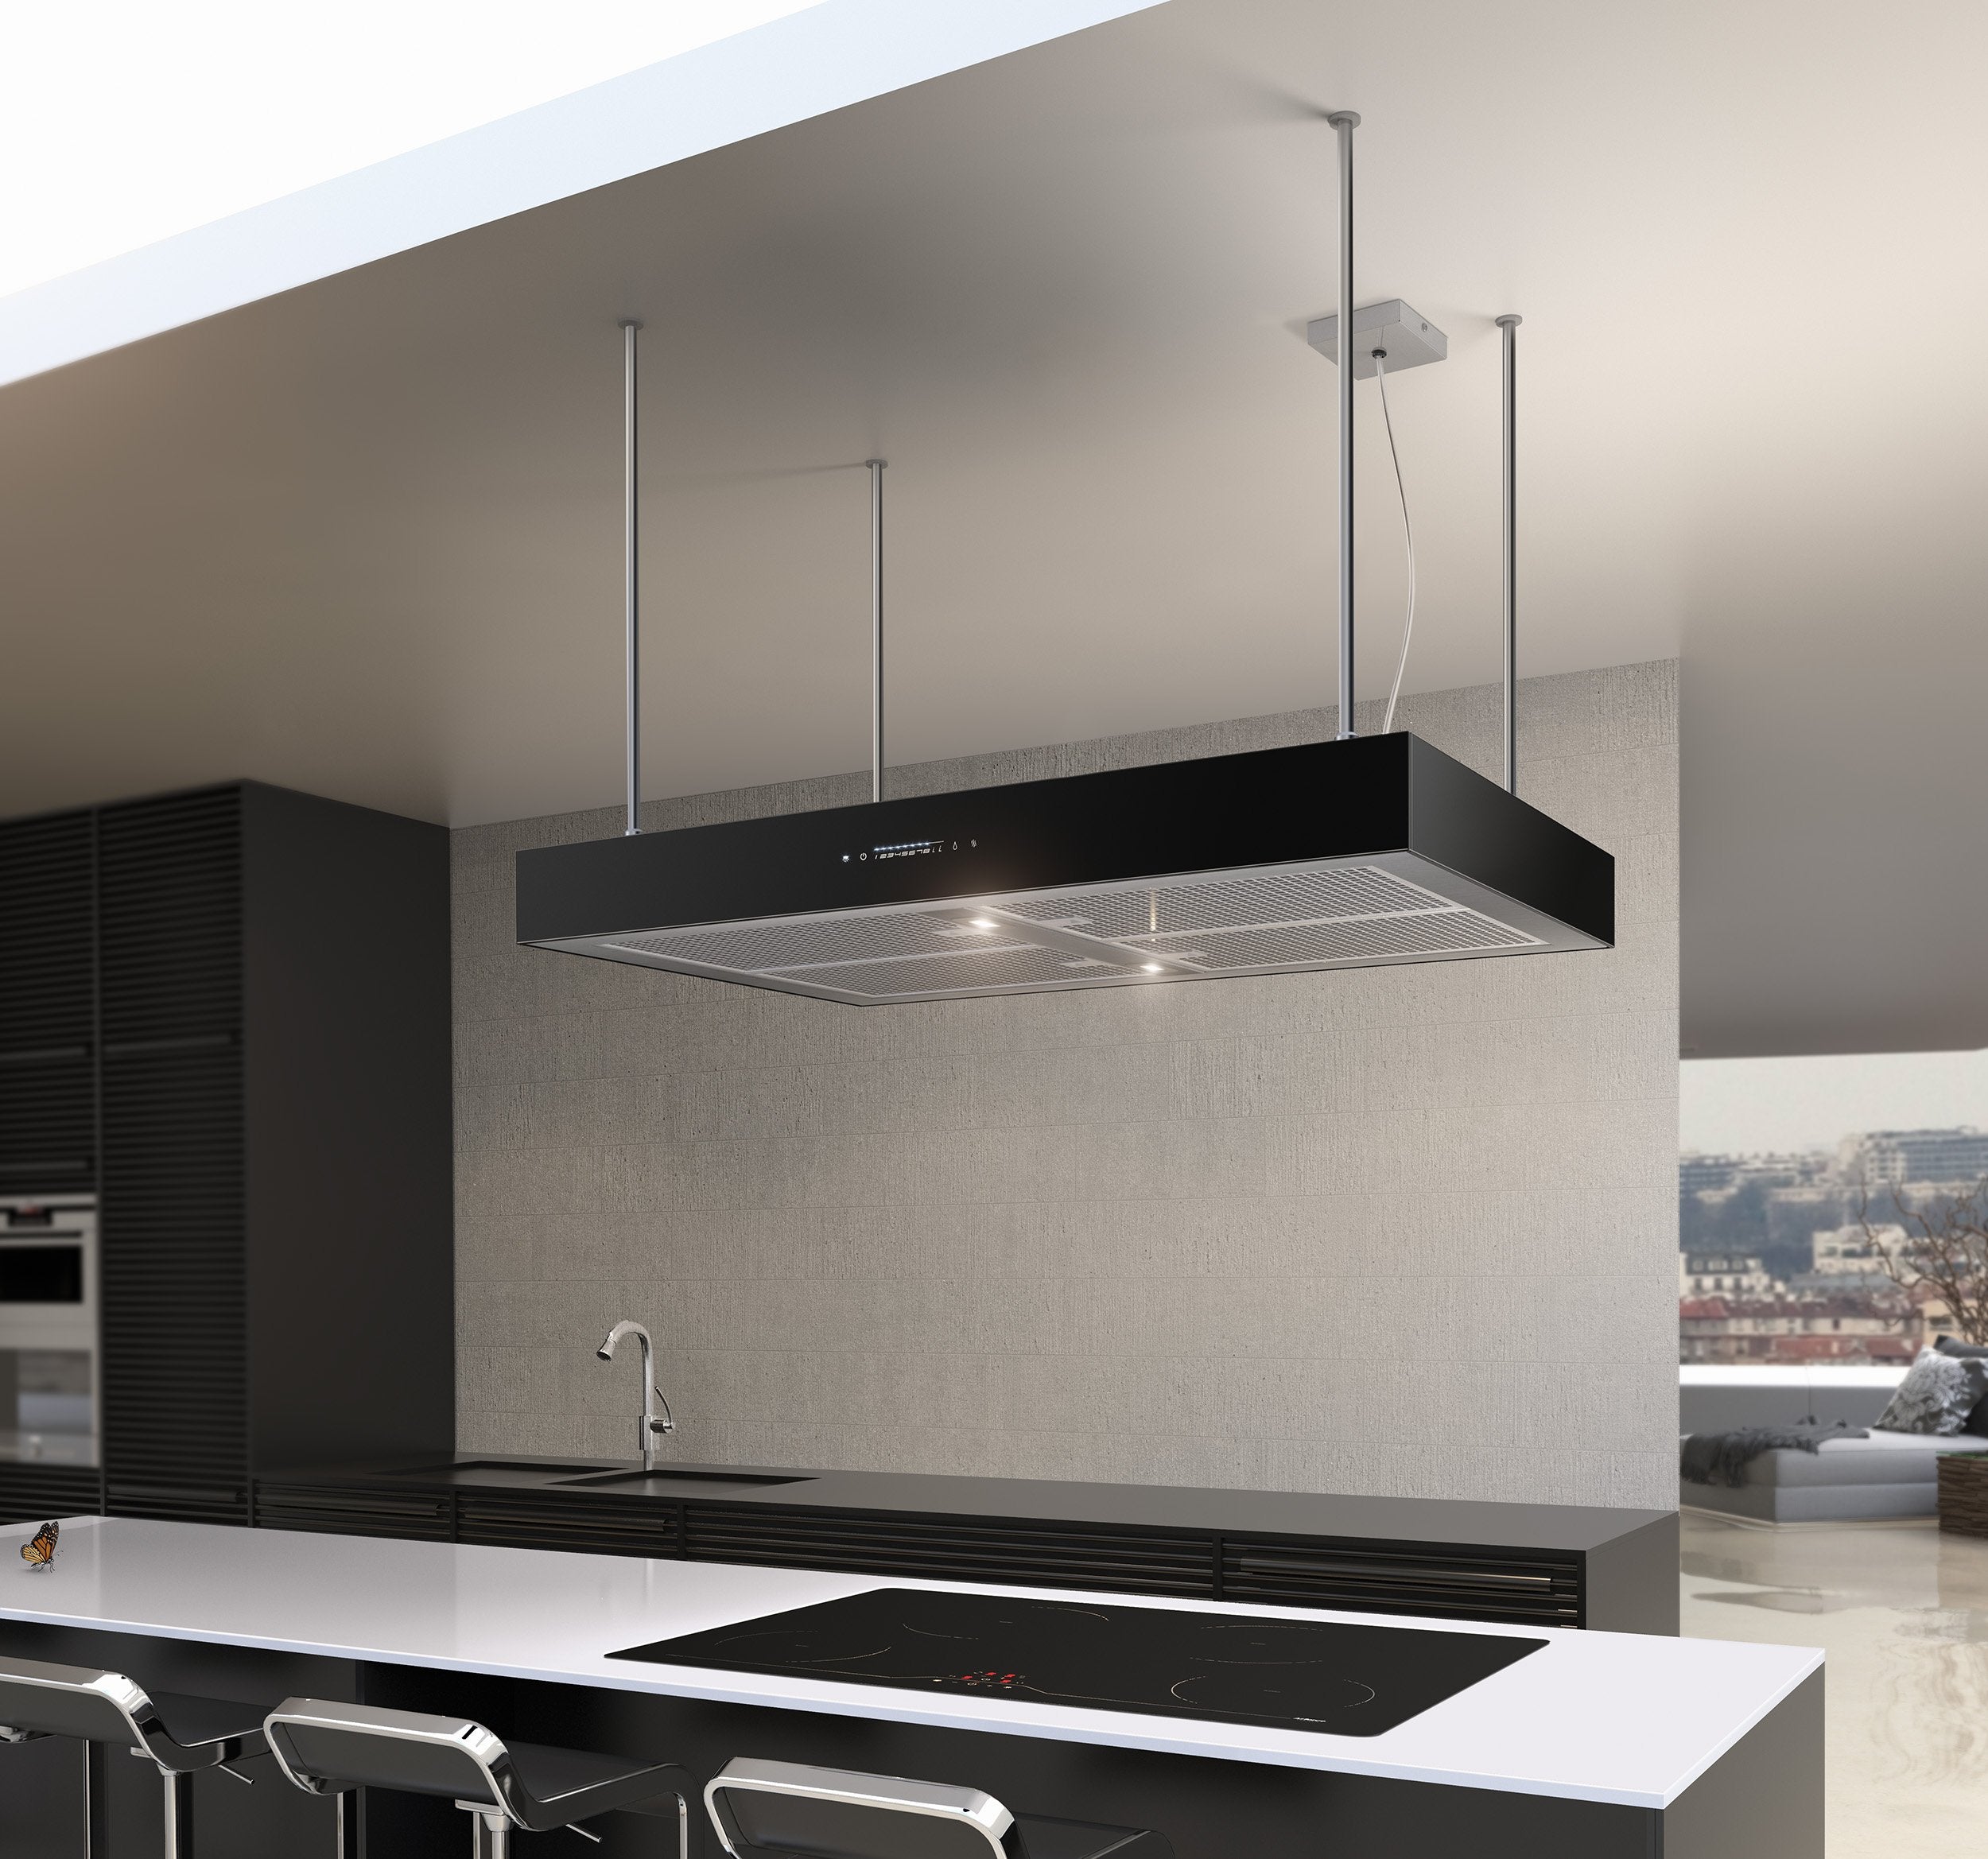 Airforce F161 2 x Axial Motor 90cm Premium Island Cooker Hood - Black - Lifestyle View